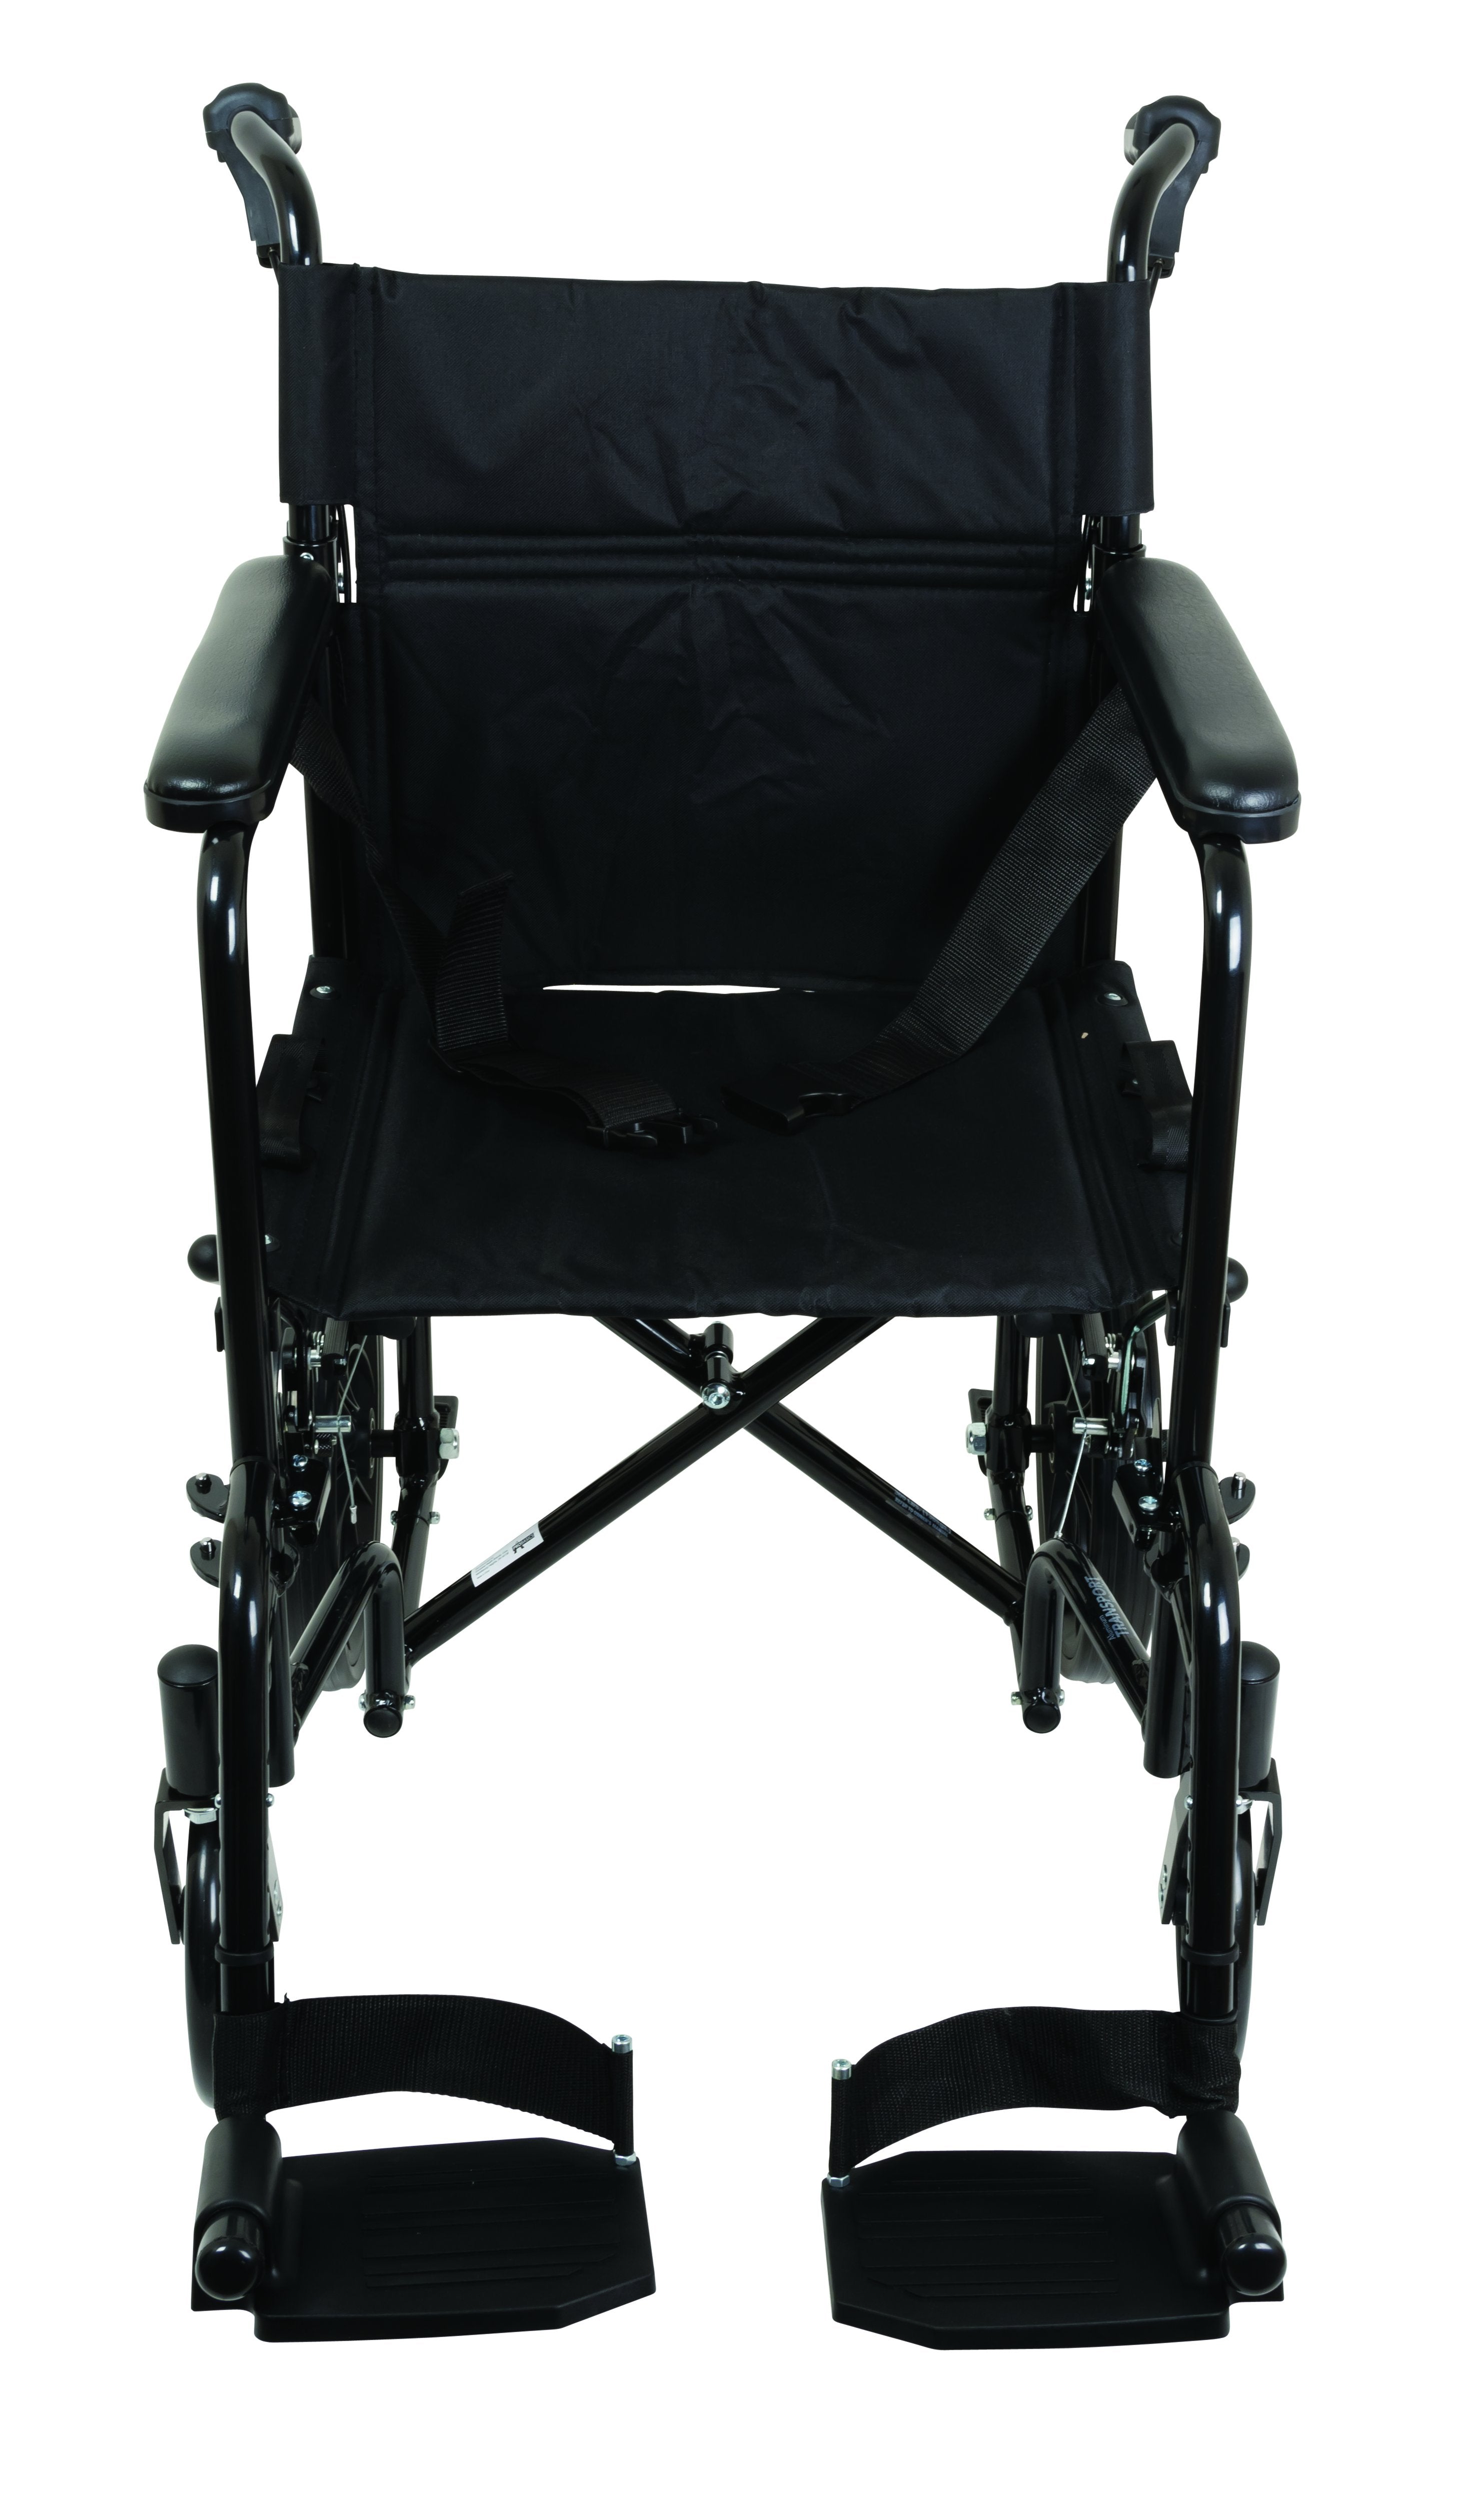 ProBasics Aluminum Transport Chair with 12-Inch Wheels